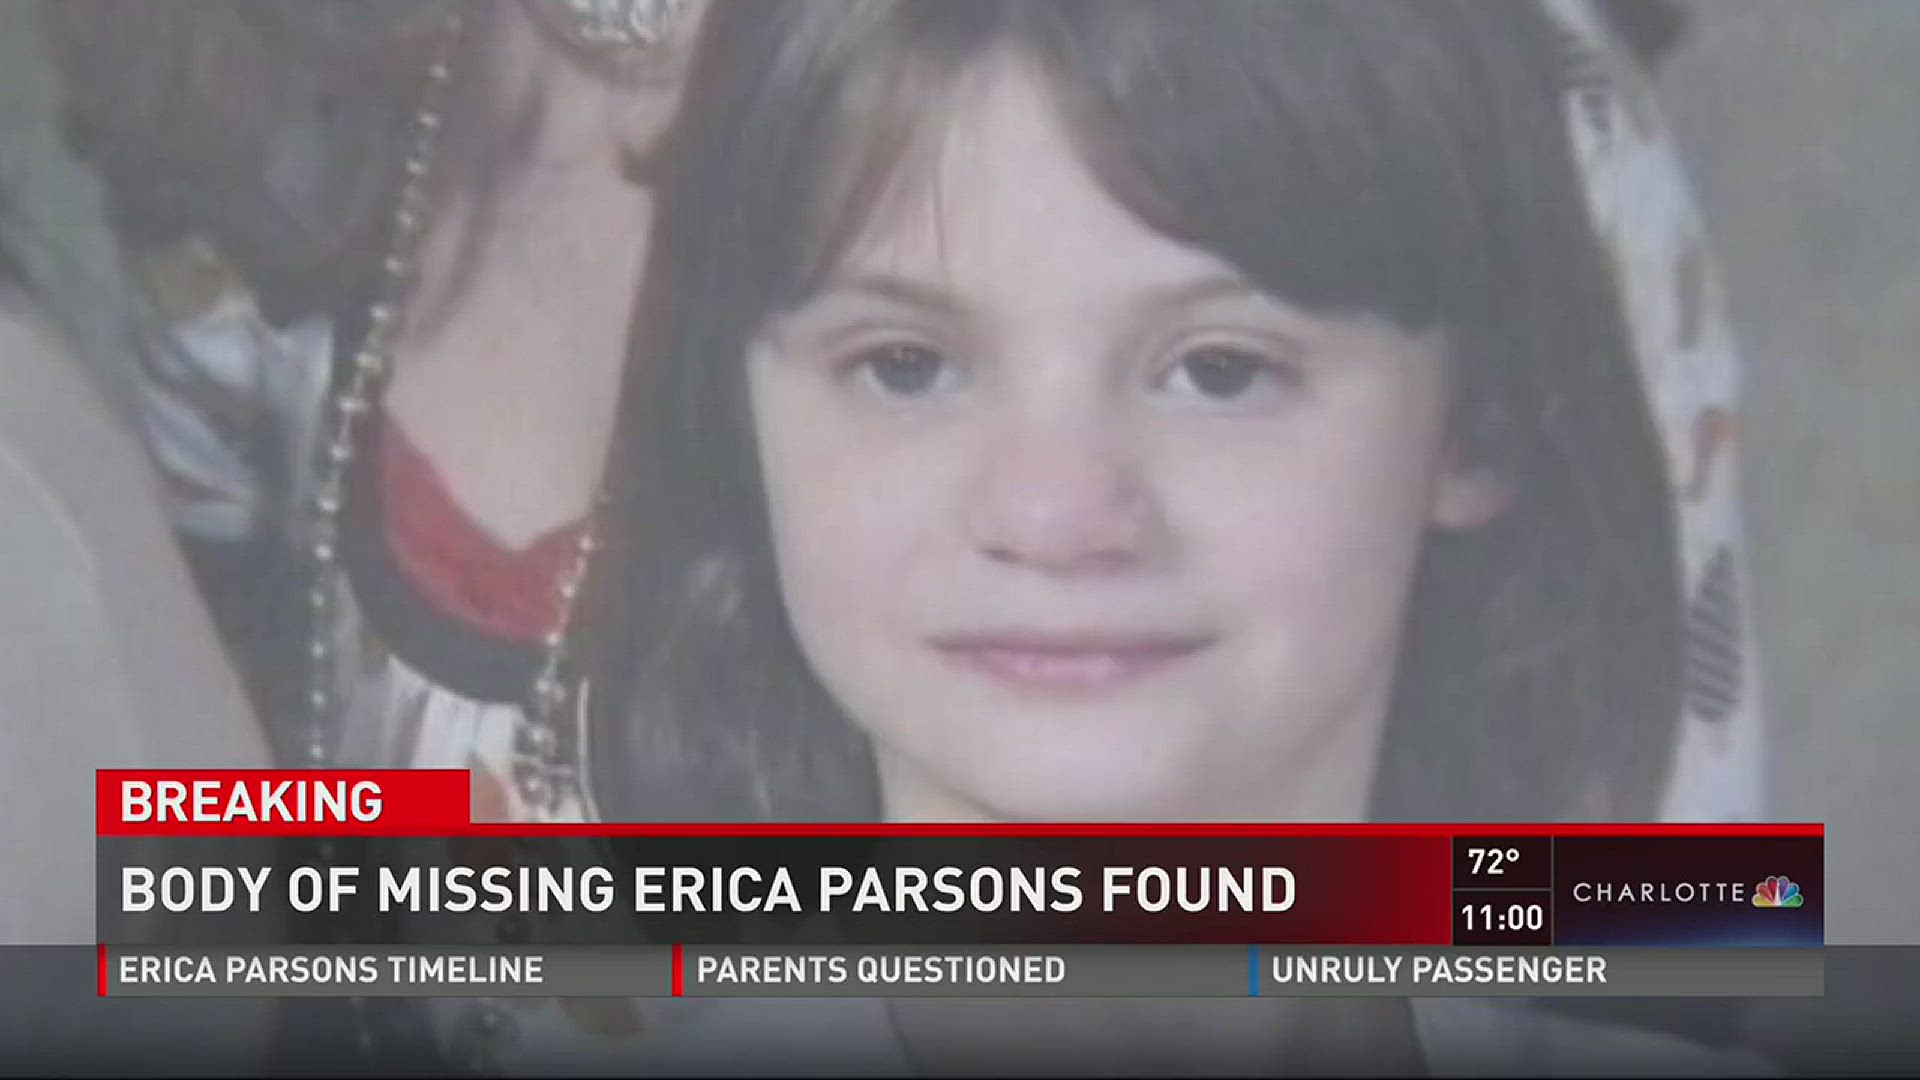 A tragic end to a cold case; after a three-year search, Erica Parsons body is found.